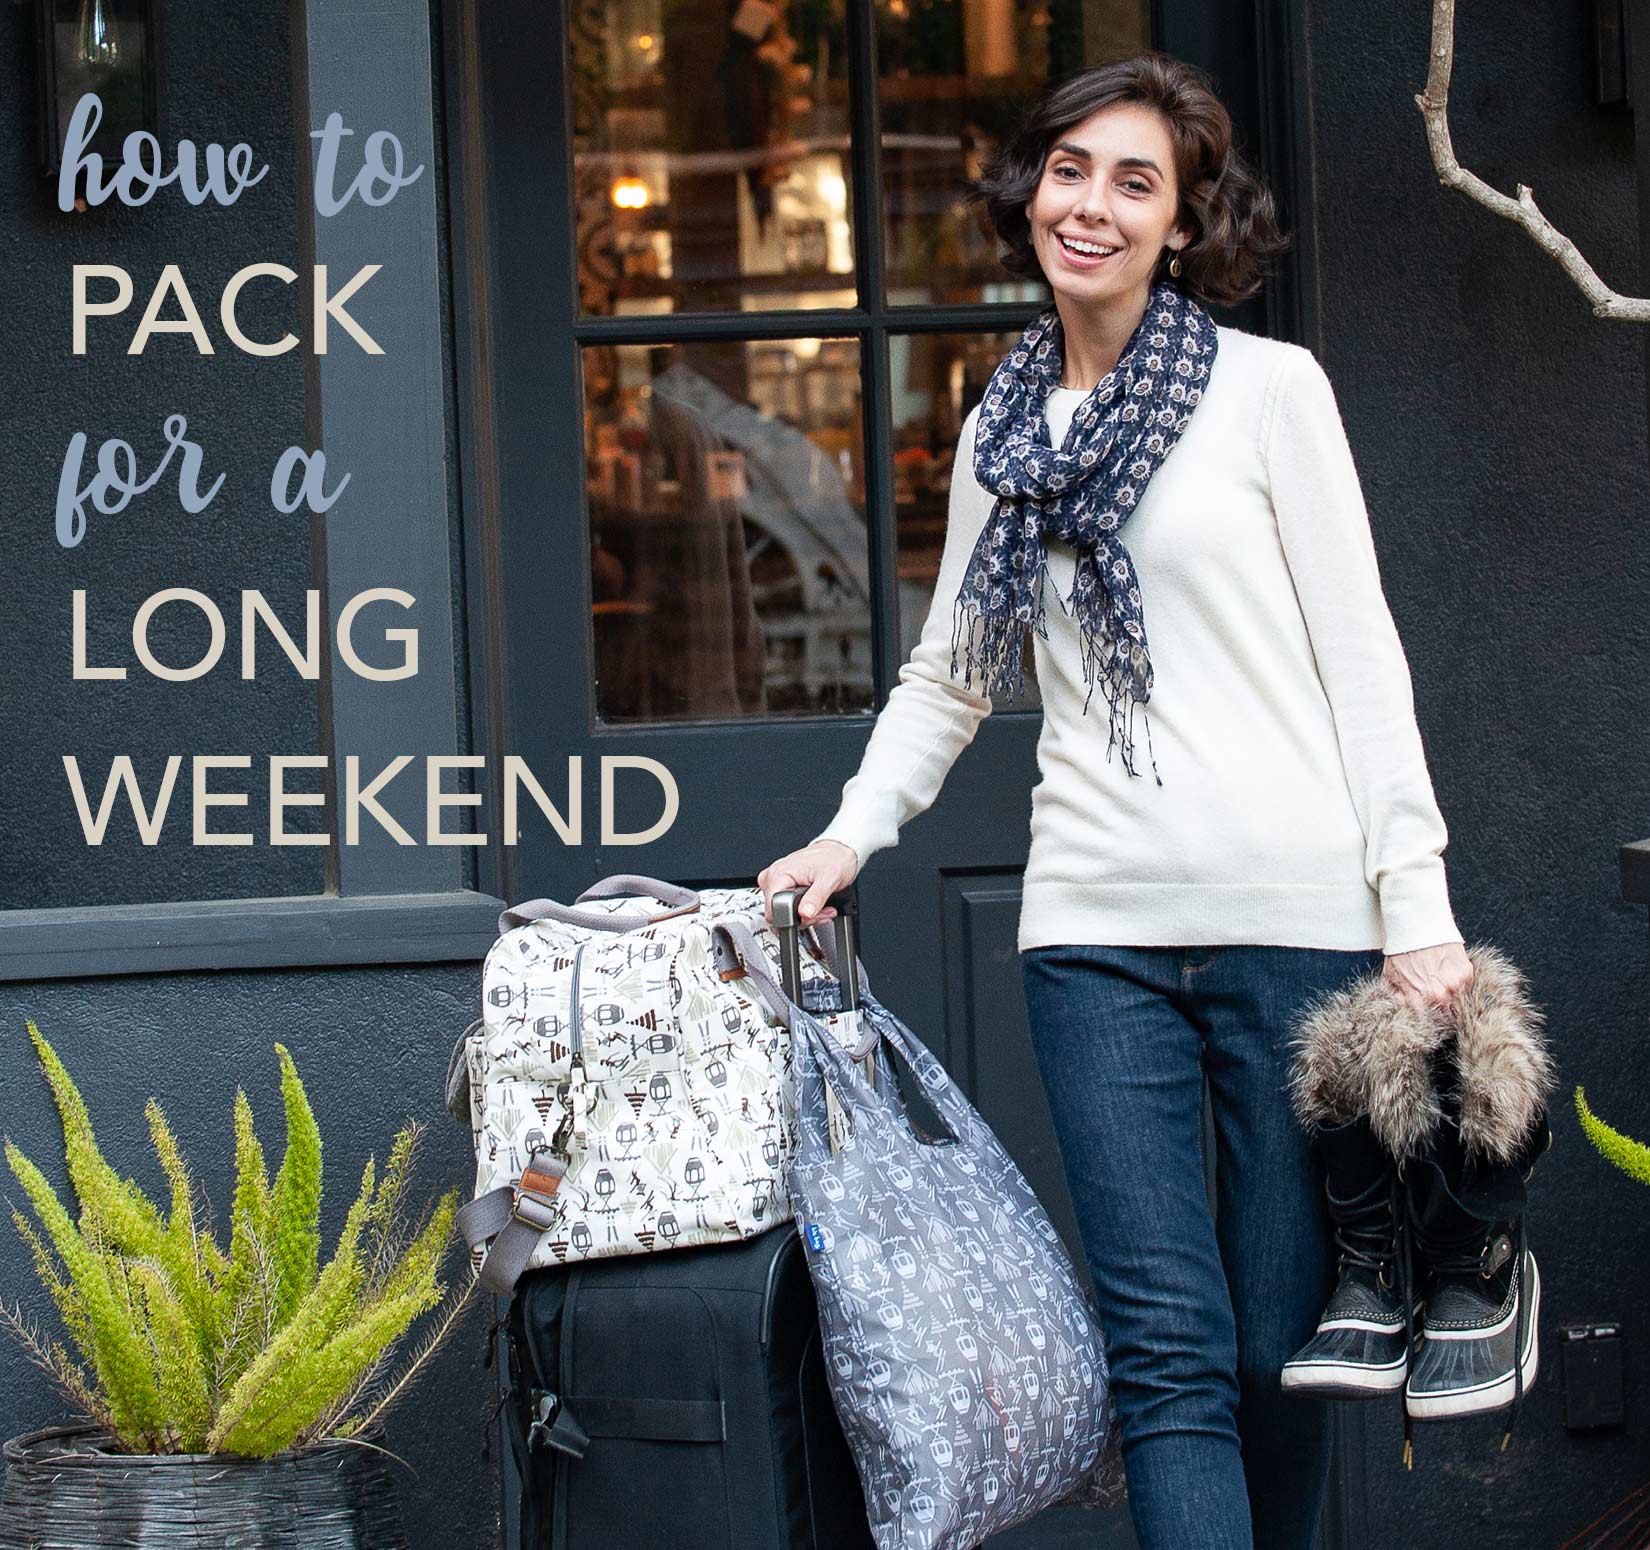 how to pack for a long weekend - woman wearing a scarf and holding a suitcase and overnighter bag